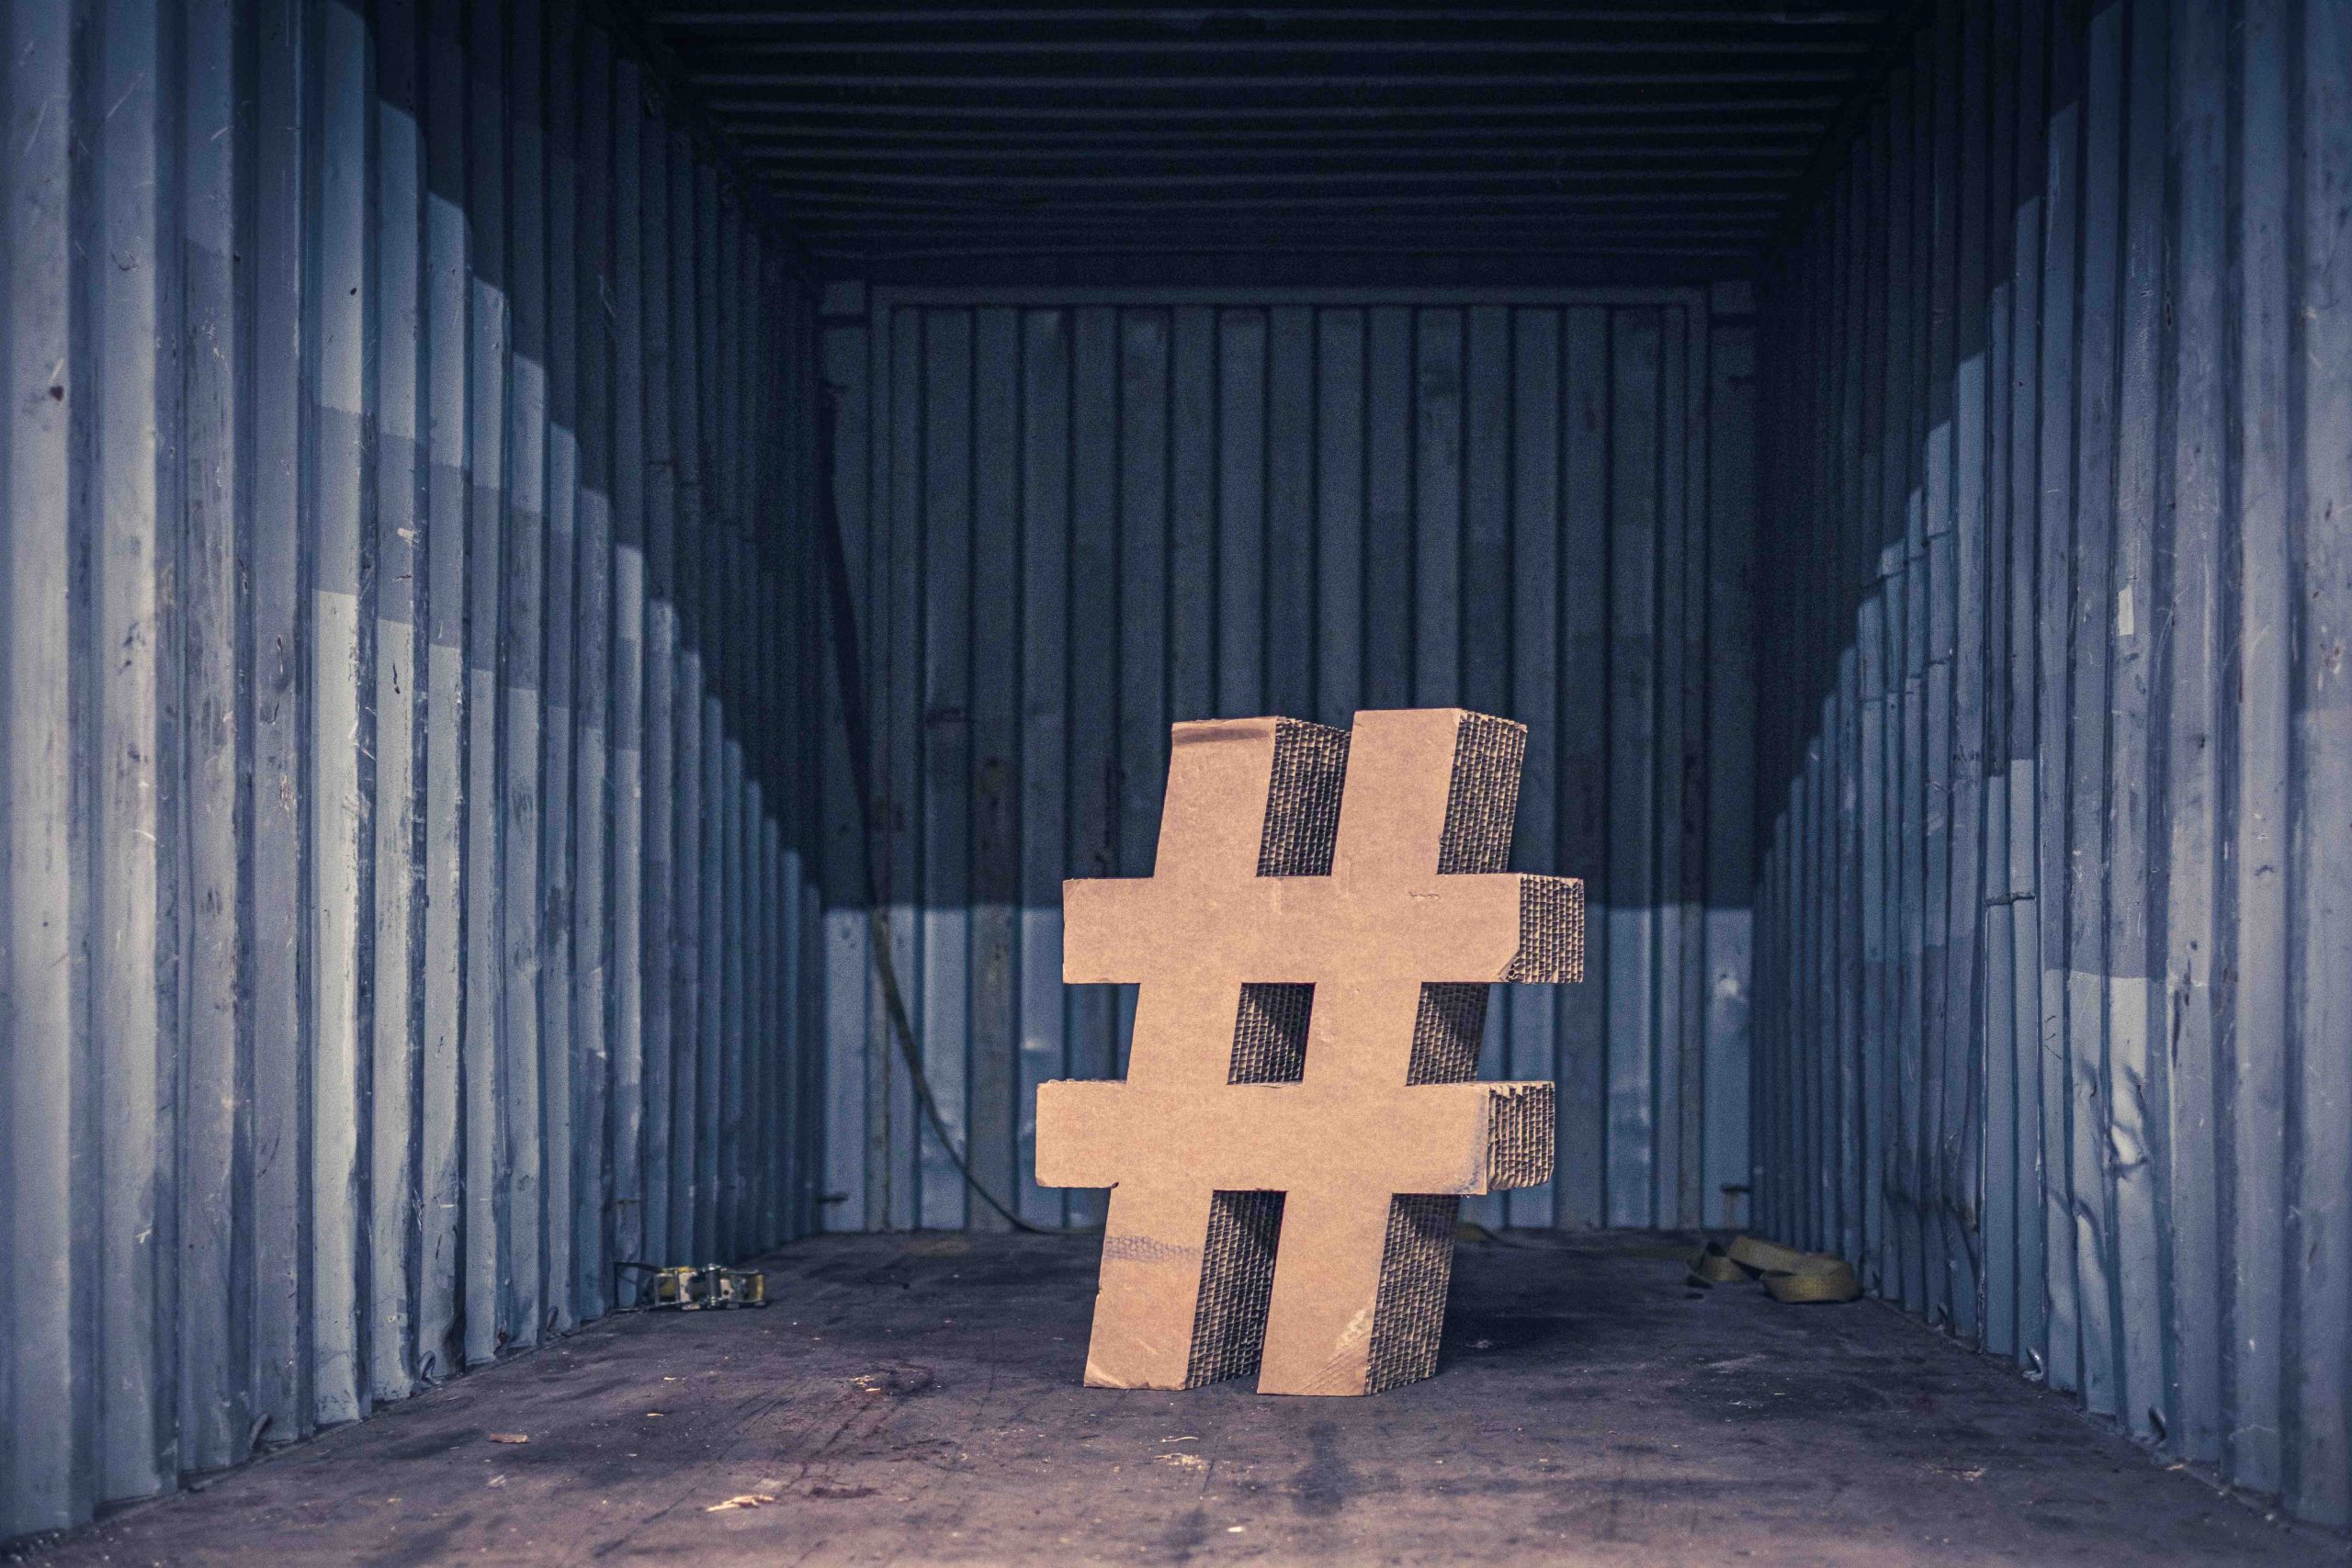 How to Find the Right Twitter Hashtags?